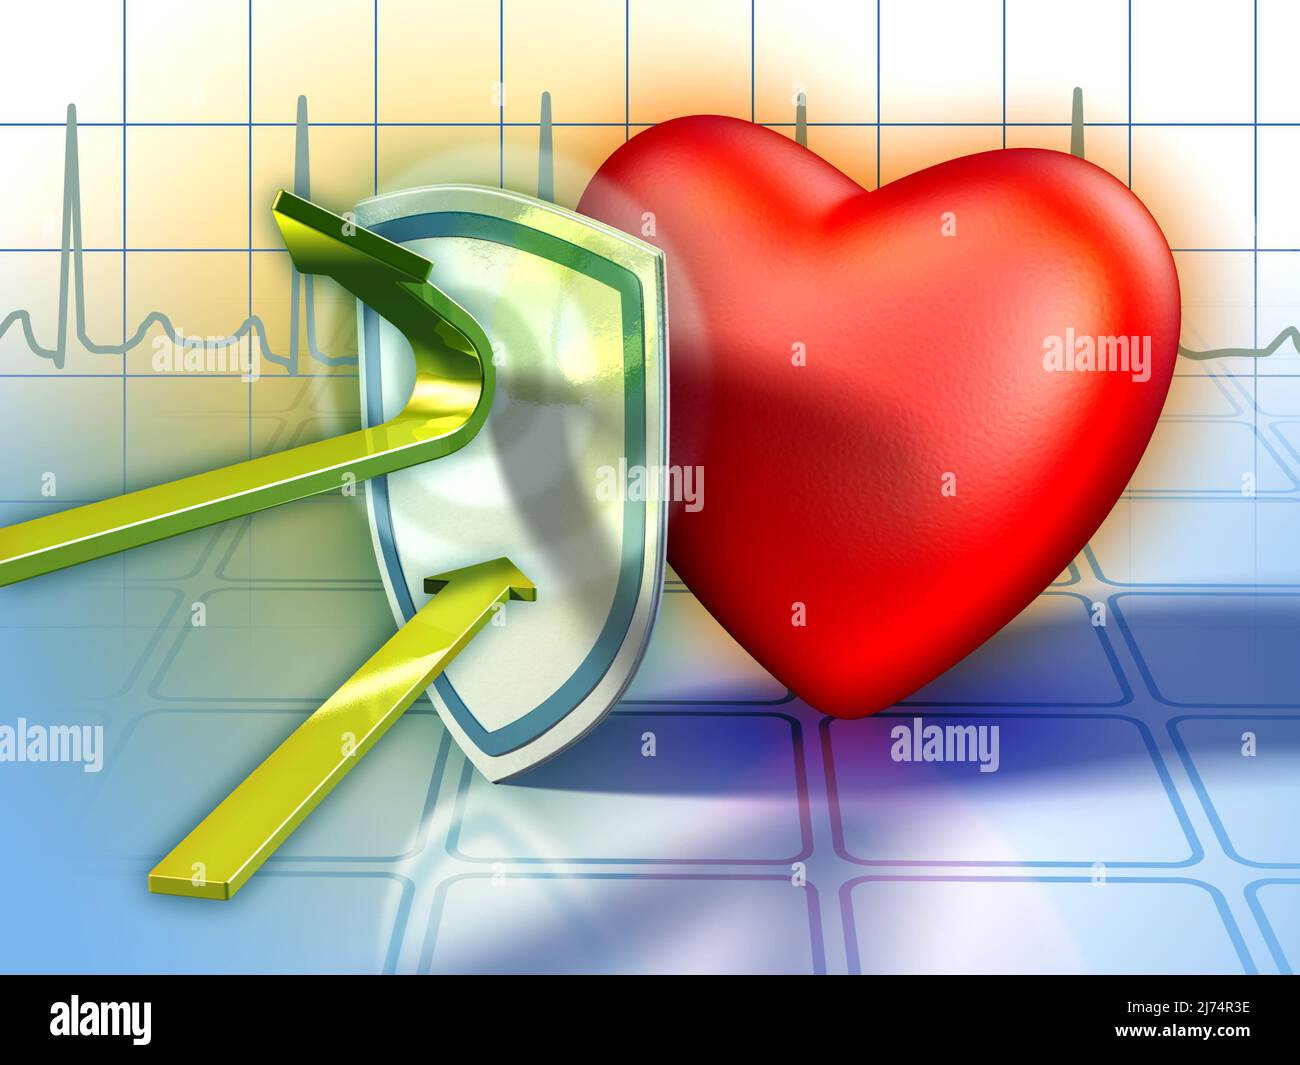 Shield protecting the heart from harmful substances. Digital illustration. Stock Photo